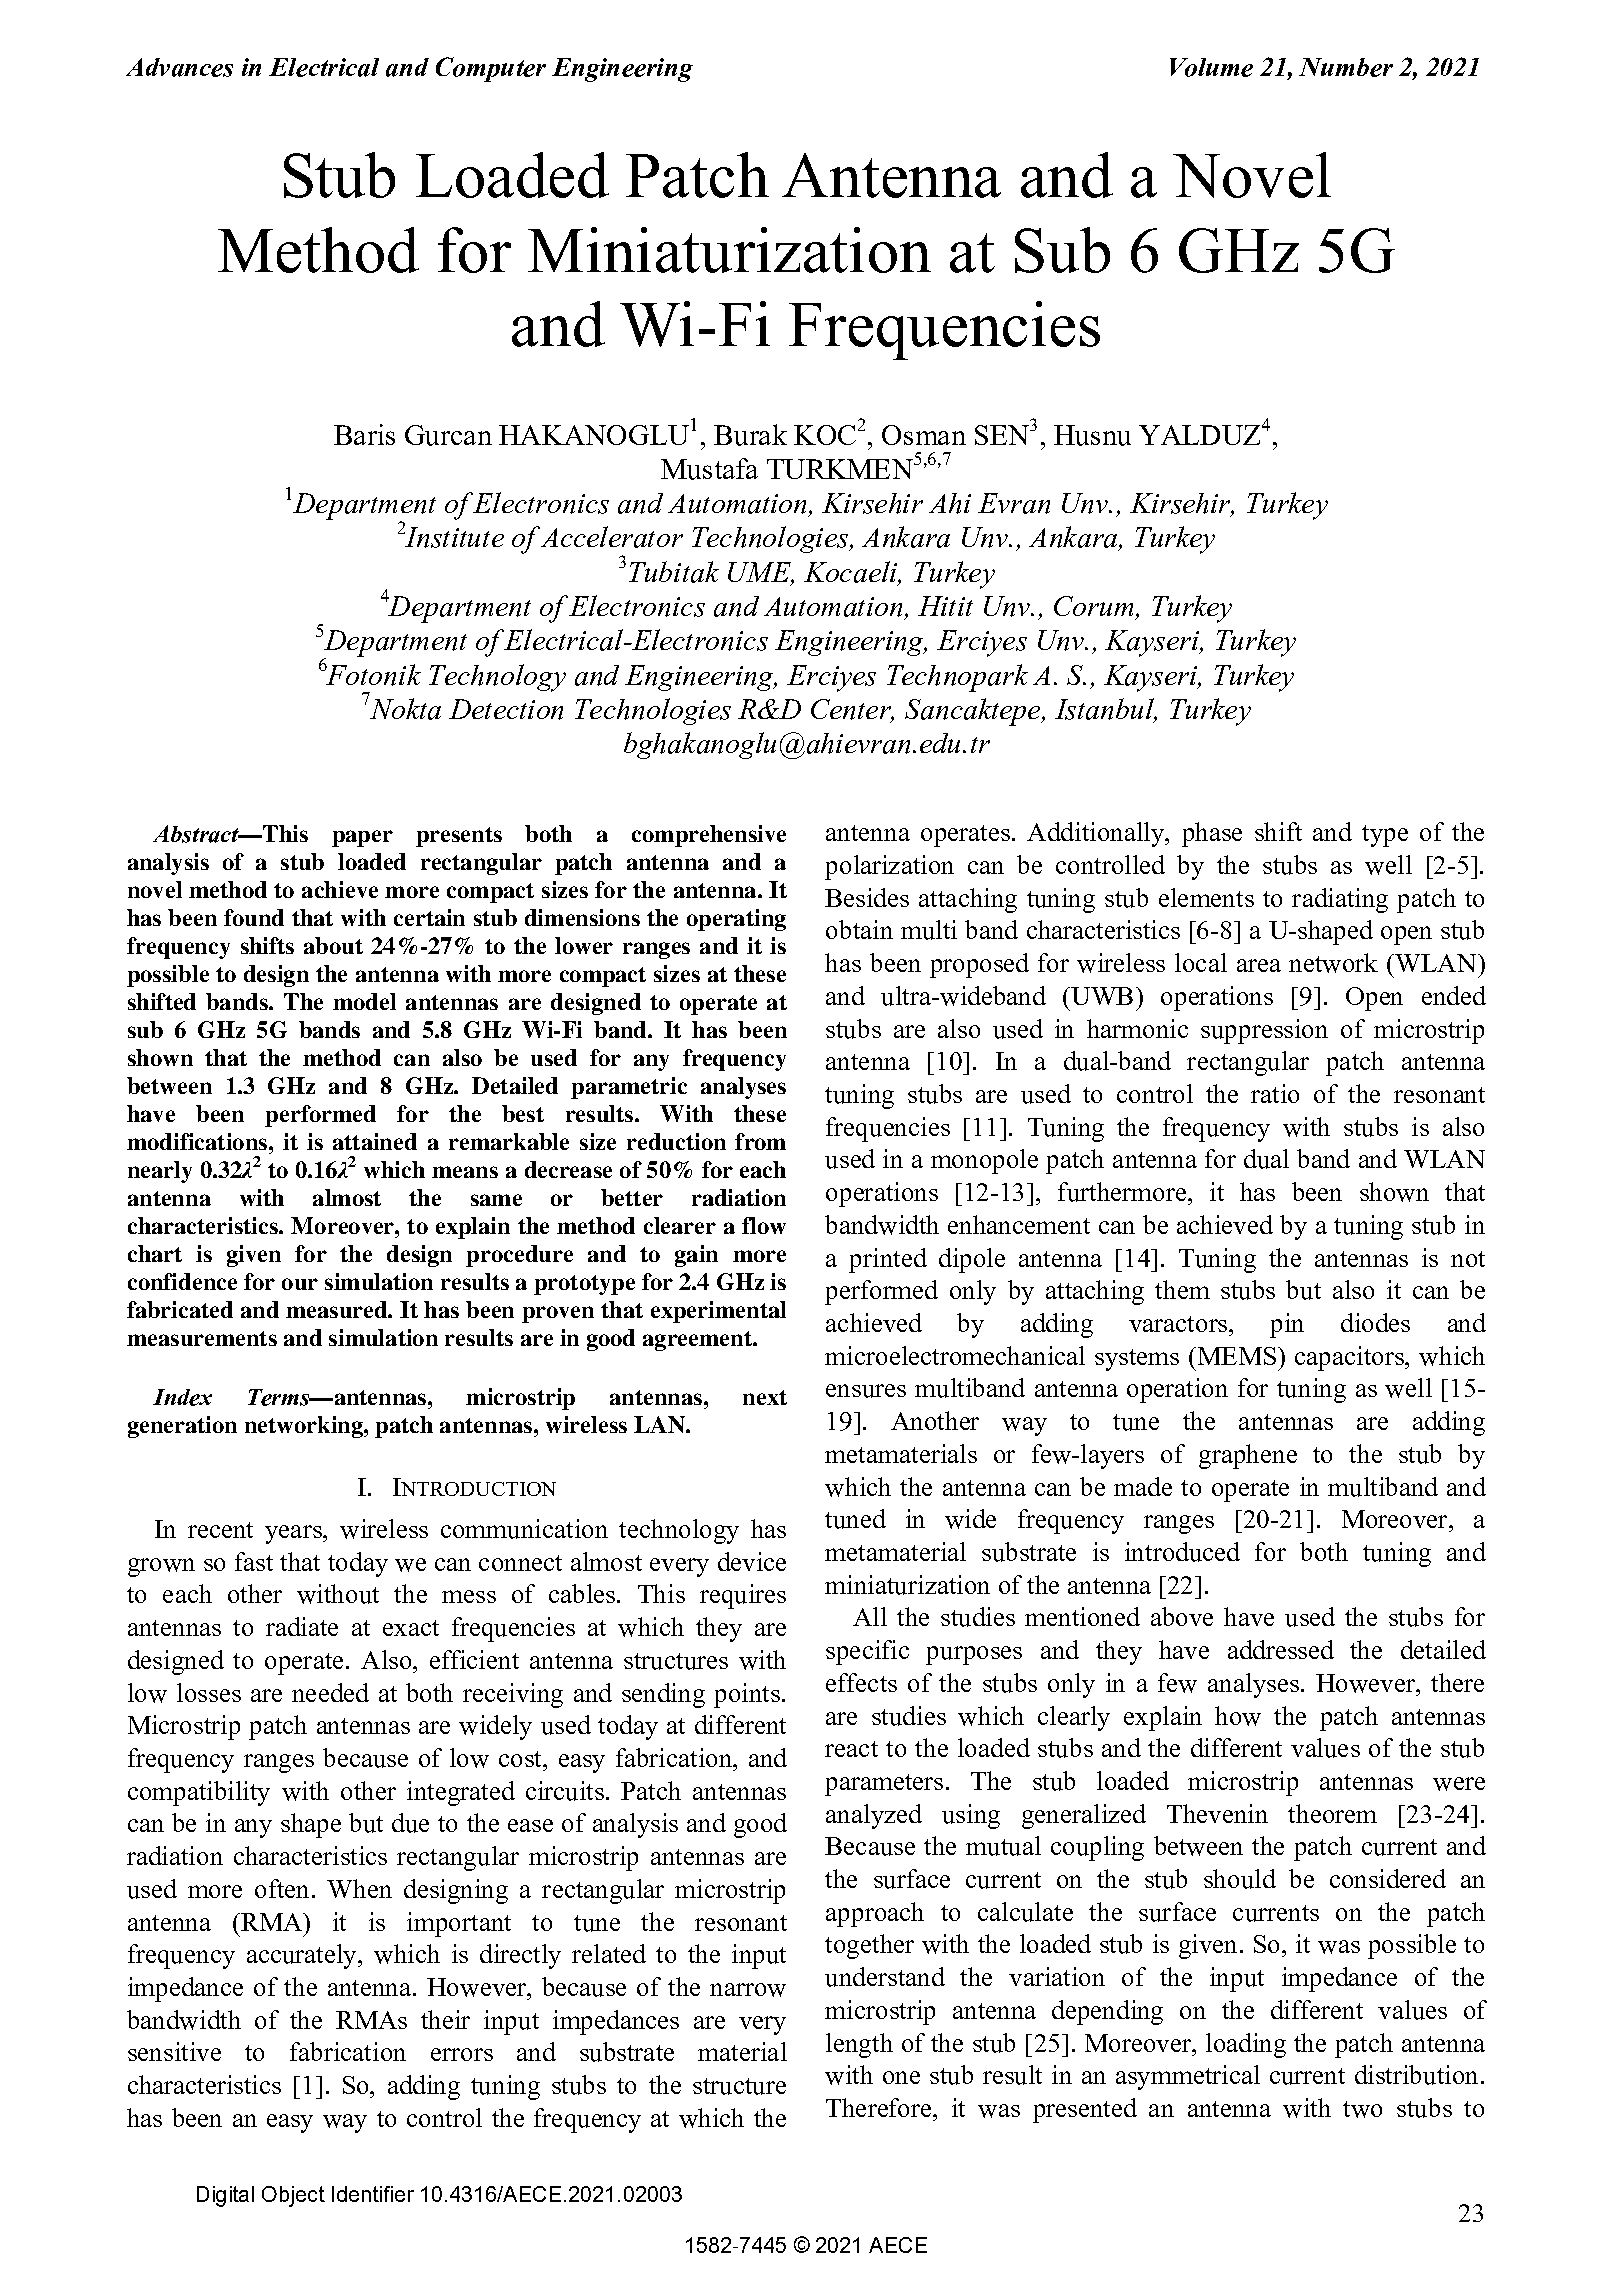 PDF Quickview for paper with DOI:10.4316/AECE.2021.02003